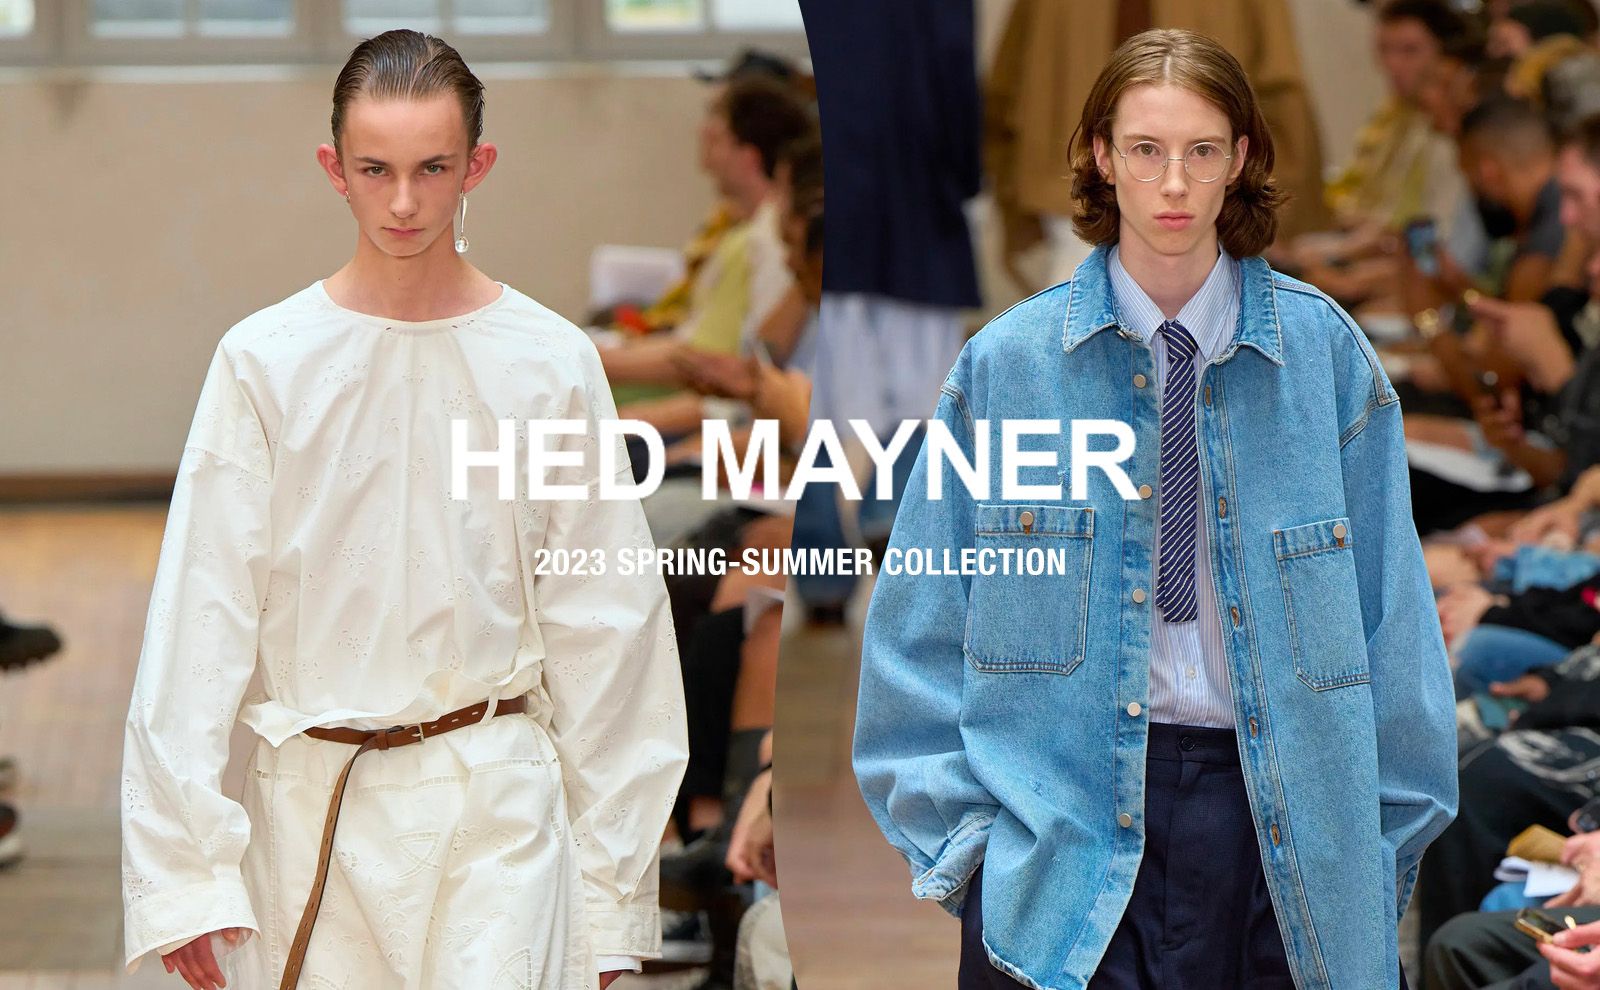 HED MAYNER / ヘドメイナー】2023 SPRING/SUMMER COLLECTION - 2nd